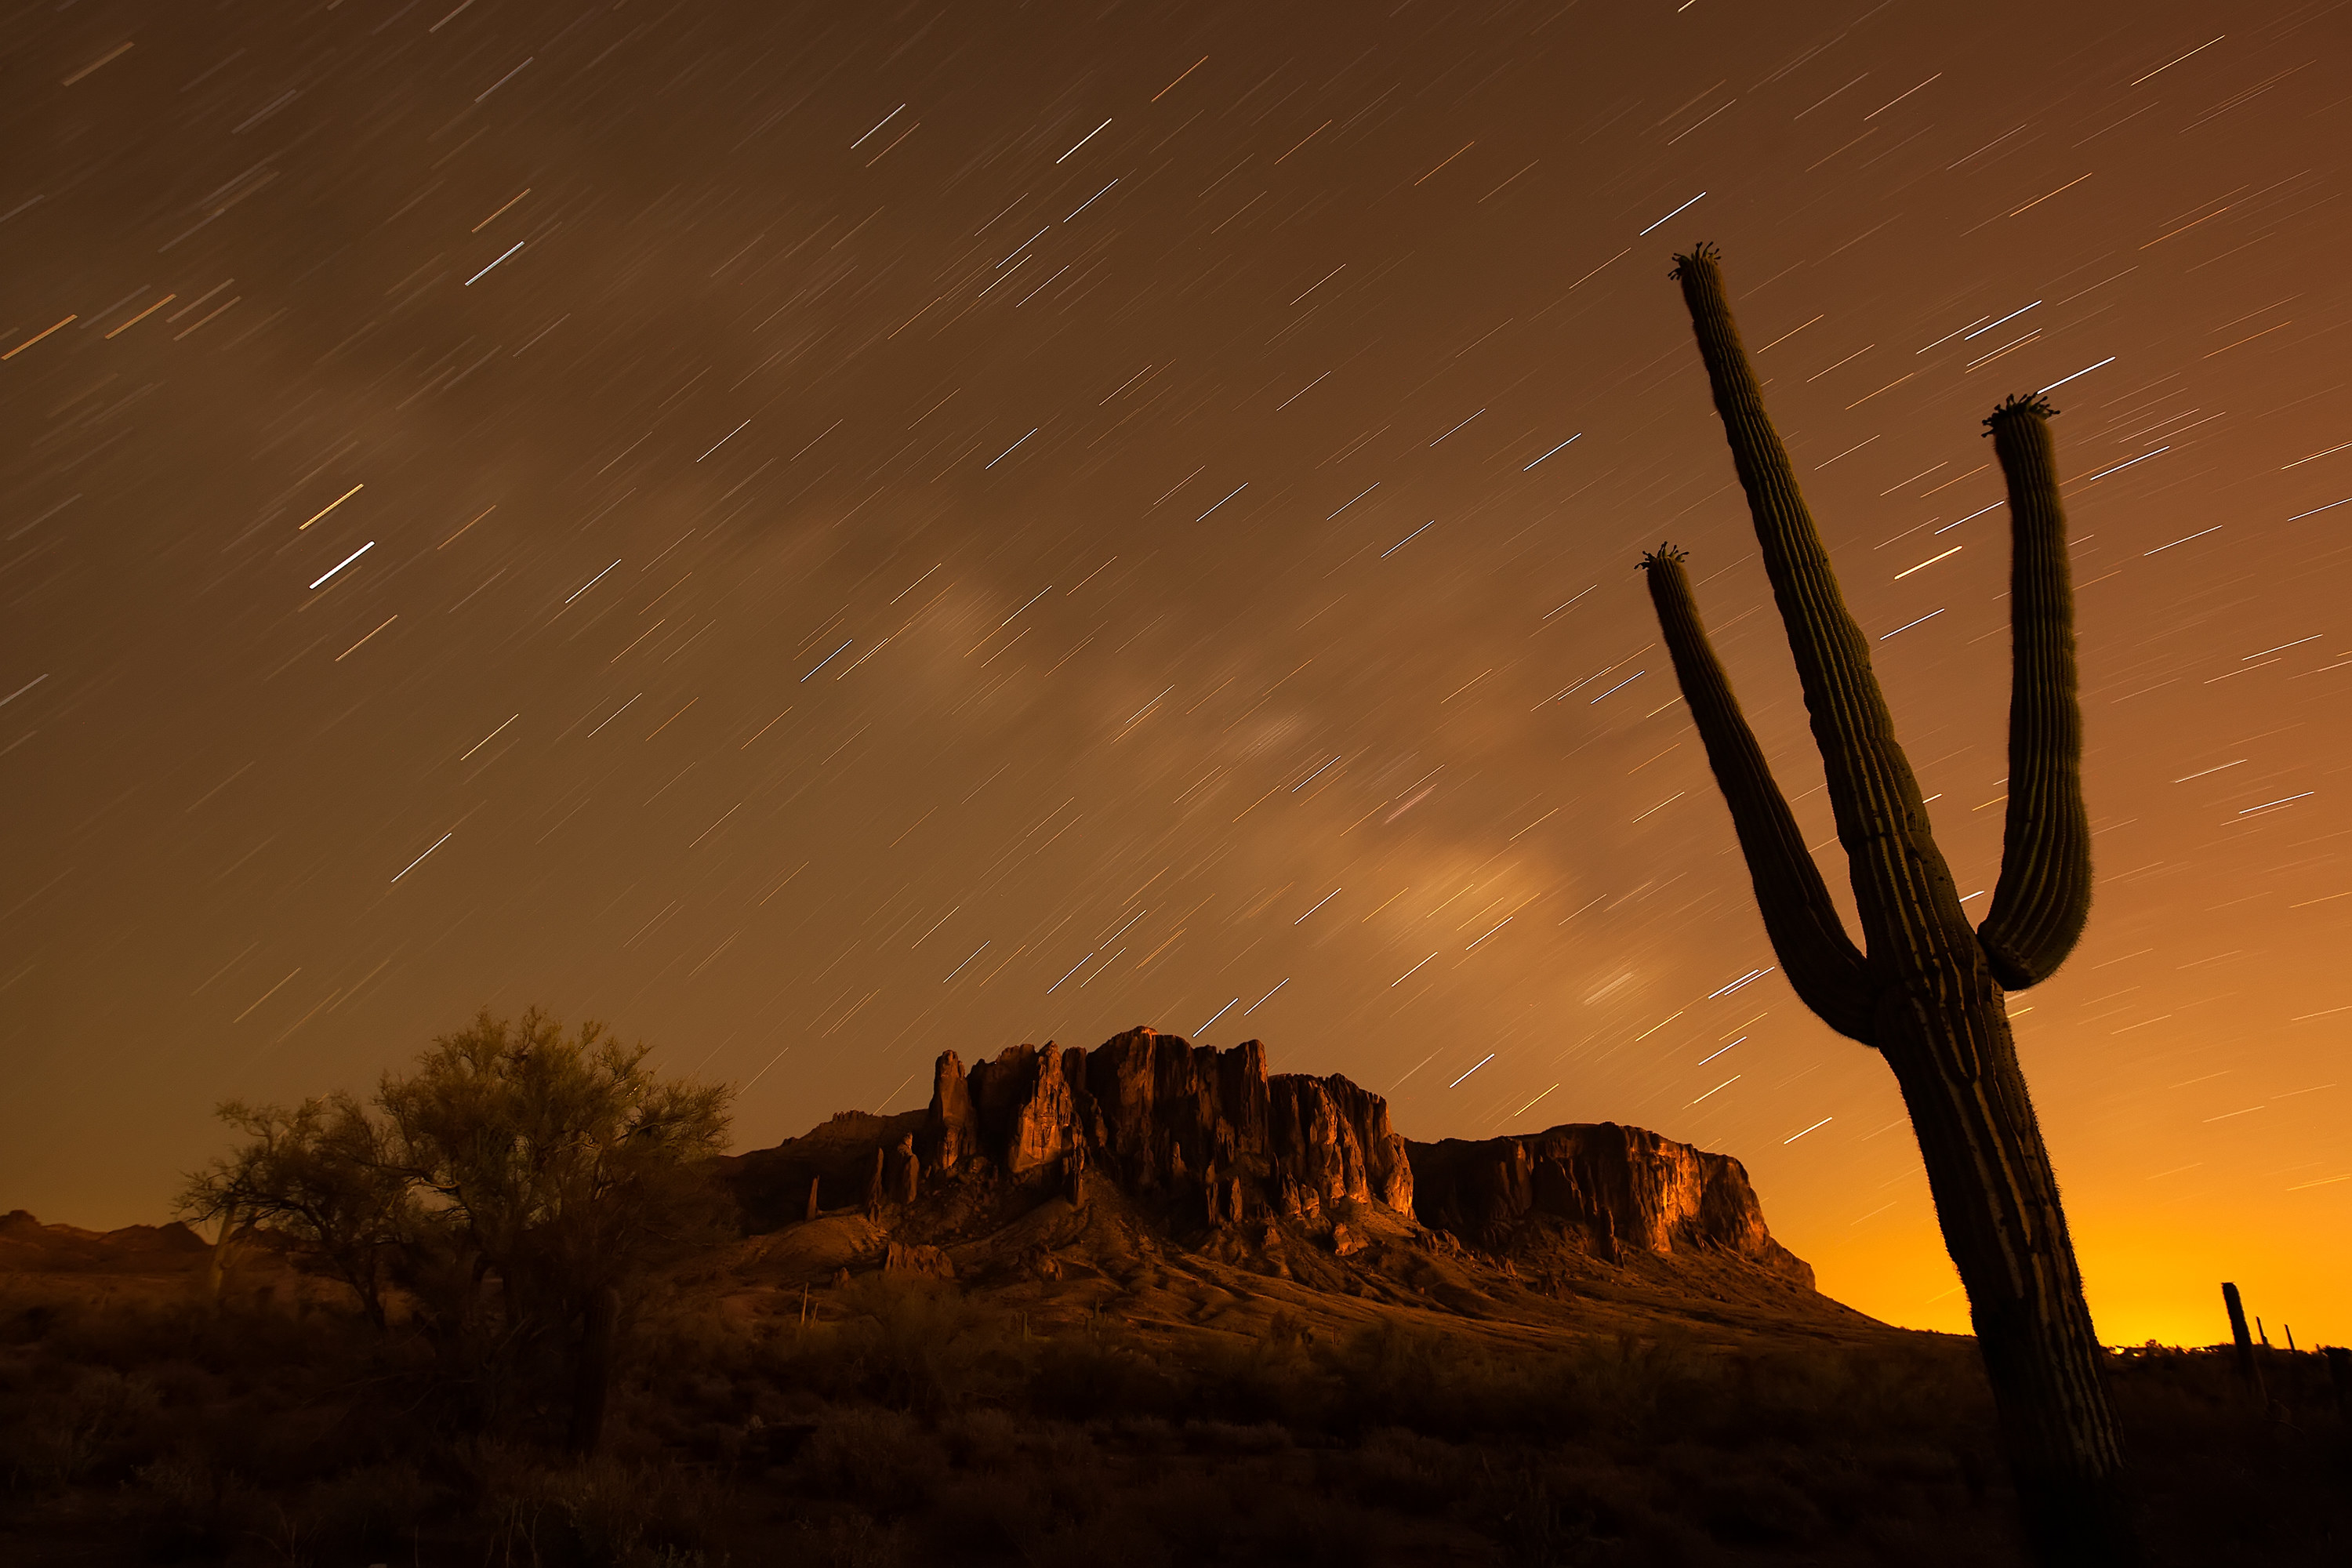 a cactus in the foreground with blurry star trails and the Superstition Mountains in the background, in Lost Dutchman State Park